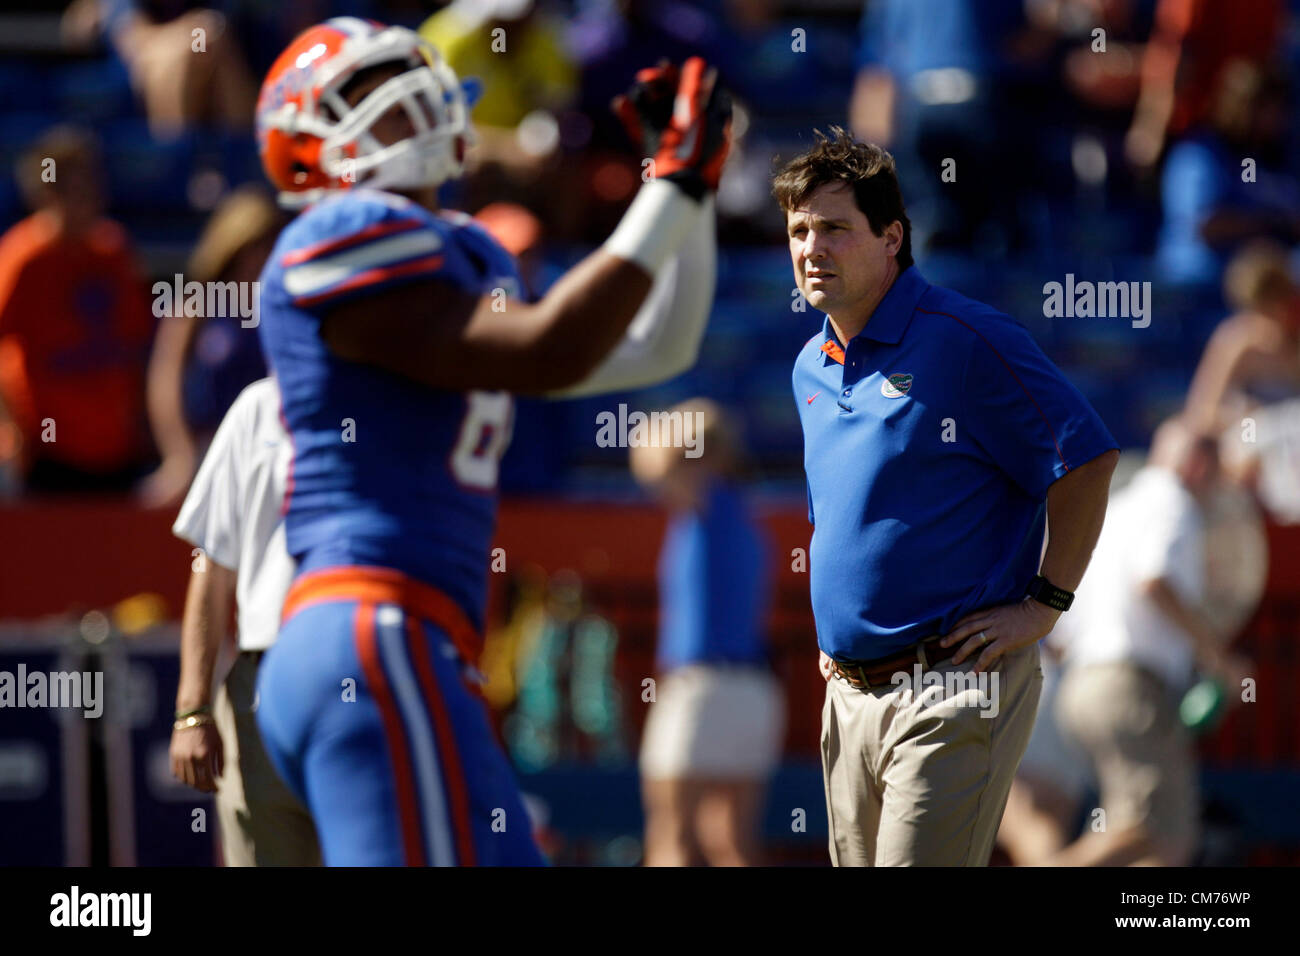 Oct. 20, 2012 - Florida, U.S. - WILL VRAGOVIC | Times.ot 360417 vrag gators 02 of (10/20/12 Gainesville, Fla.) Florida Gators head coach Will Muschamp watches warmups before the South Carolina Gamecocks at the Florida Gators football game at Ben Hill Griffin Stadium in Gainesville, Fla. on Saturday, Oct. 20. (Credit Image: © Will Vragovic/Tampa Bay Times/ZUMAPRESS.com) Stock Photo